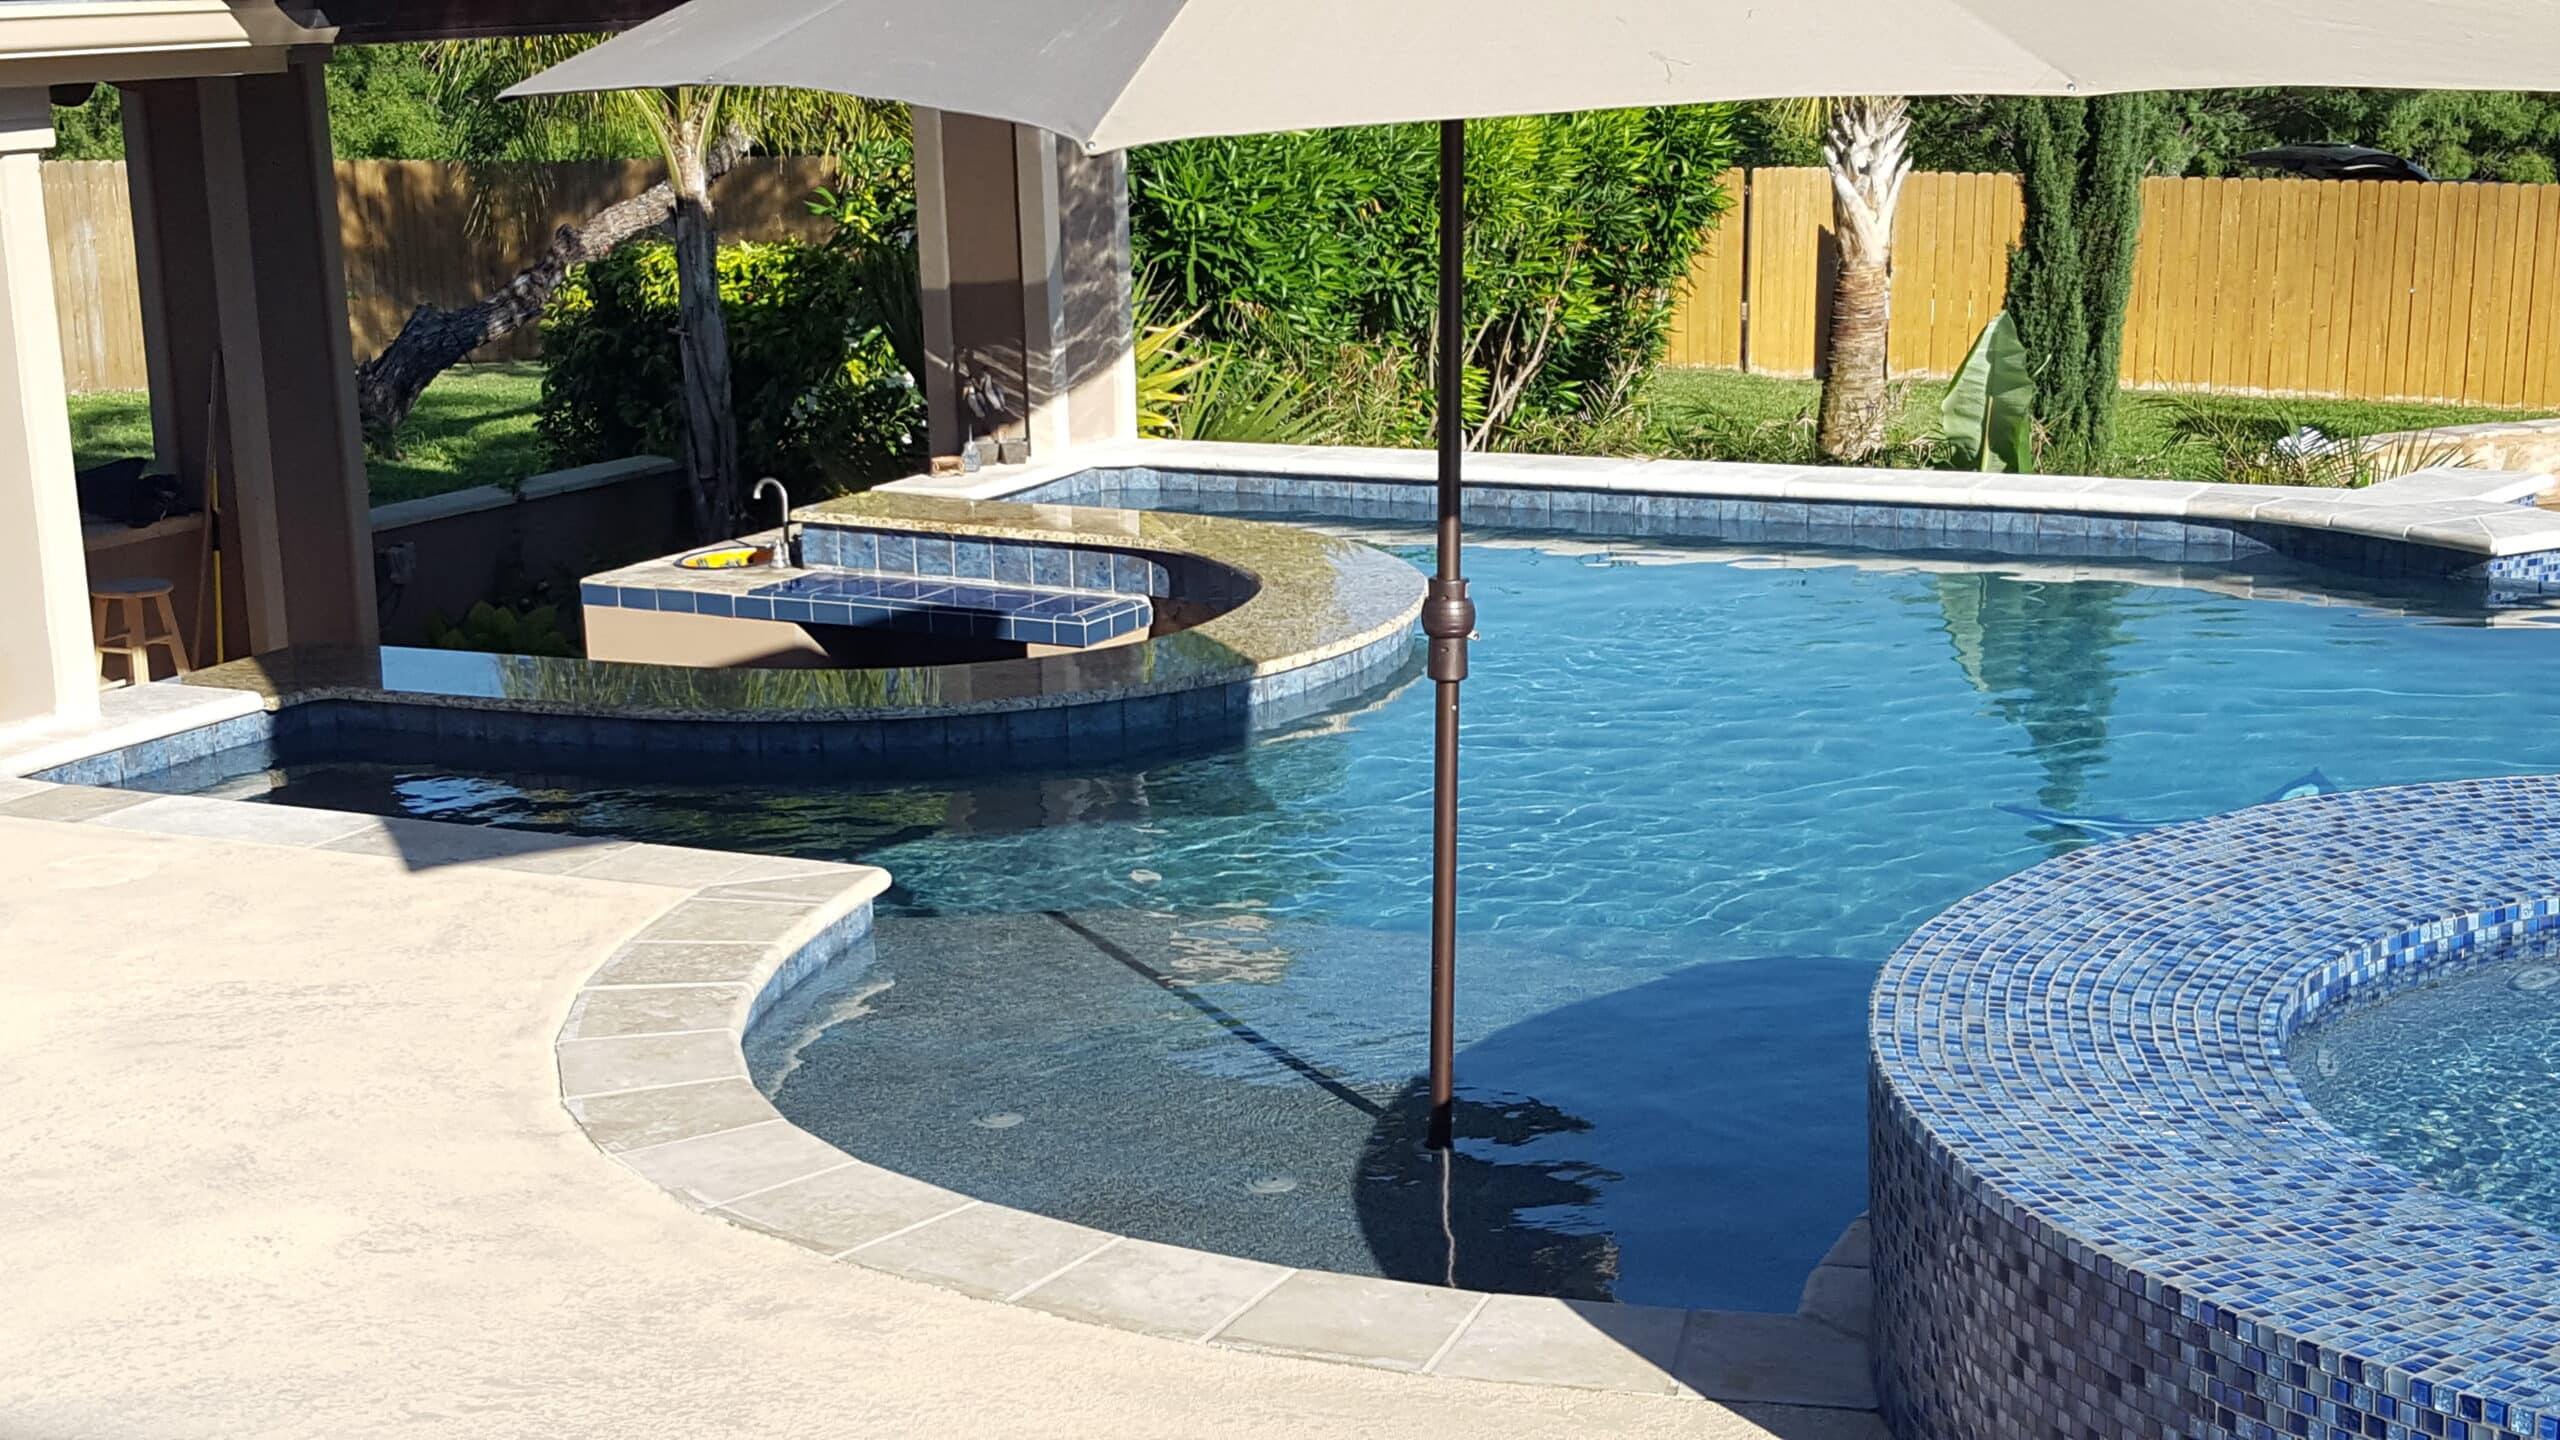 What tasks can be completed in a pool renovation?